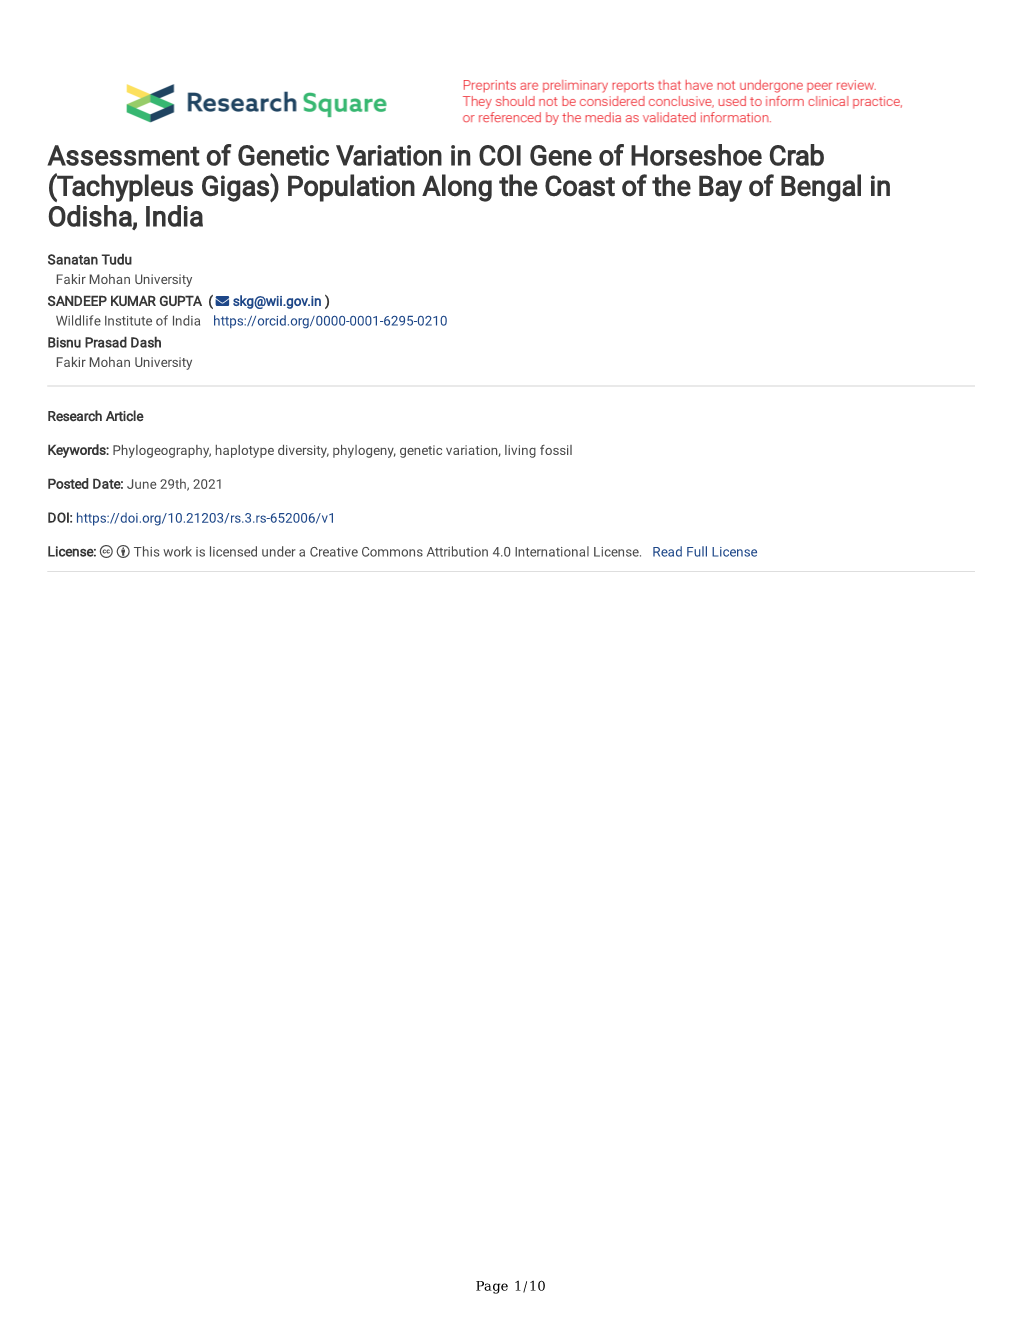 Assessment of Genetic Variation in COI Gene of Horseshoe Crab (Tachypleus Gigas) Population Along the Coast of the Bay of Bengal in Odisha, India